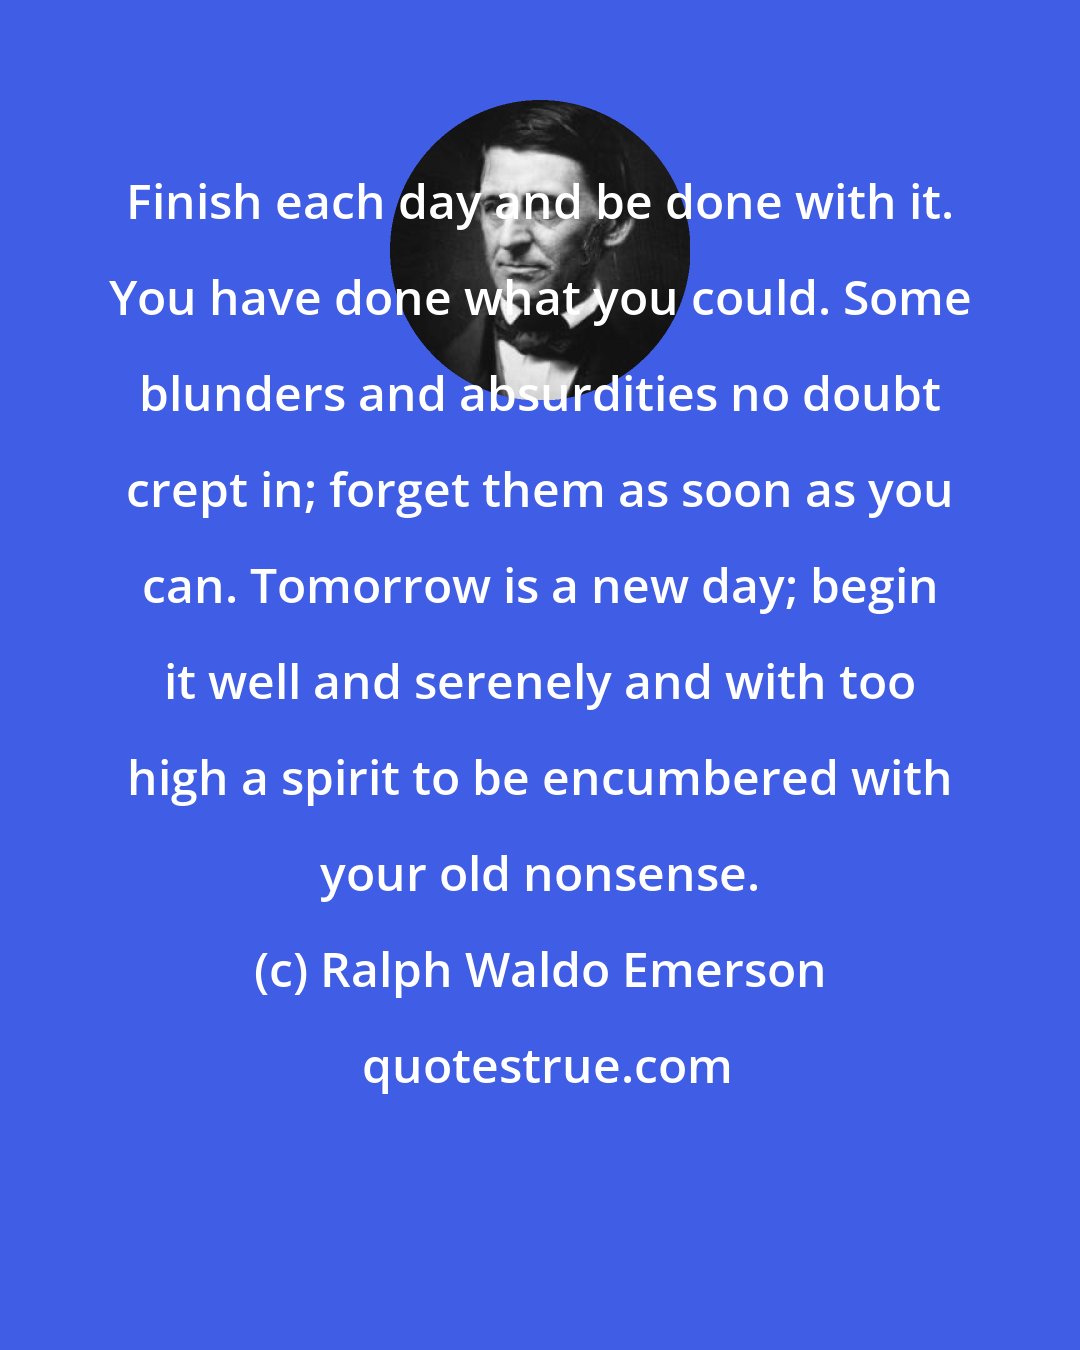 Ralph Waldo Emerson: Finish each day and be done with it. You have done what you could. Some blunders and absurdities no doubt crept in; forget them as soon as you can. Tomorrow is a new day; begin it well and serenely and with too high a spirit to be encumbered with your old nonsense.